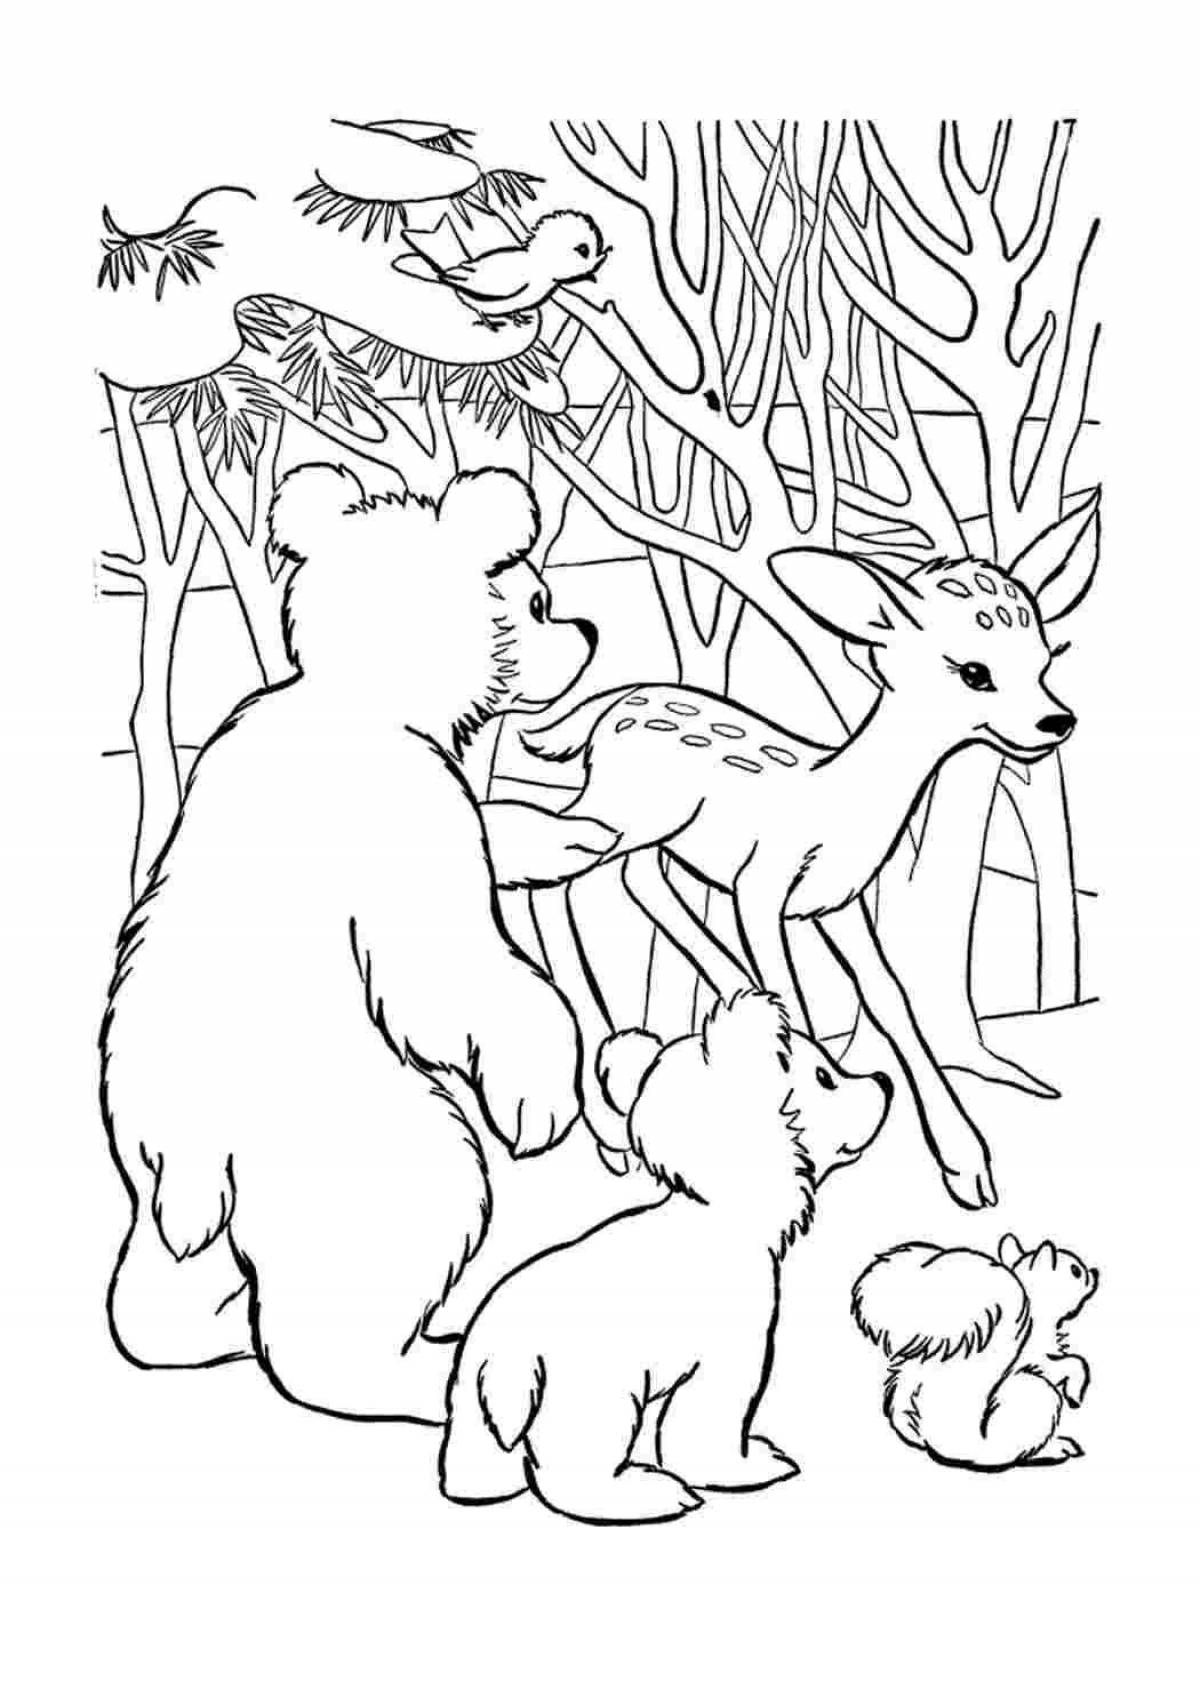 Coloring pages of forest animals for children 4-5 years old